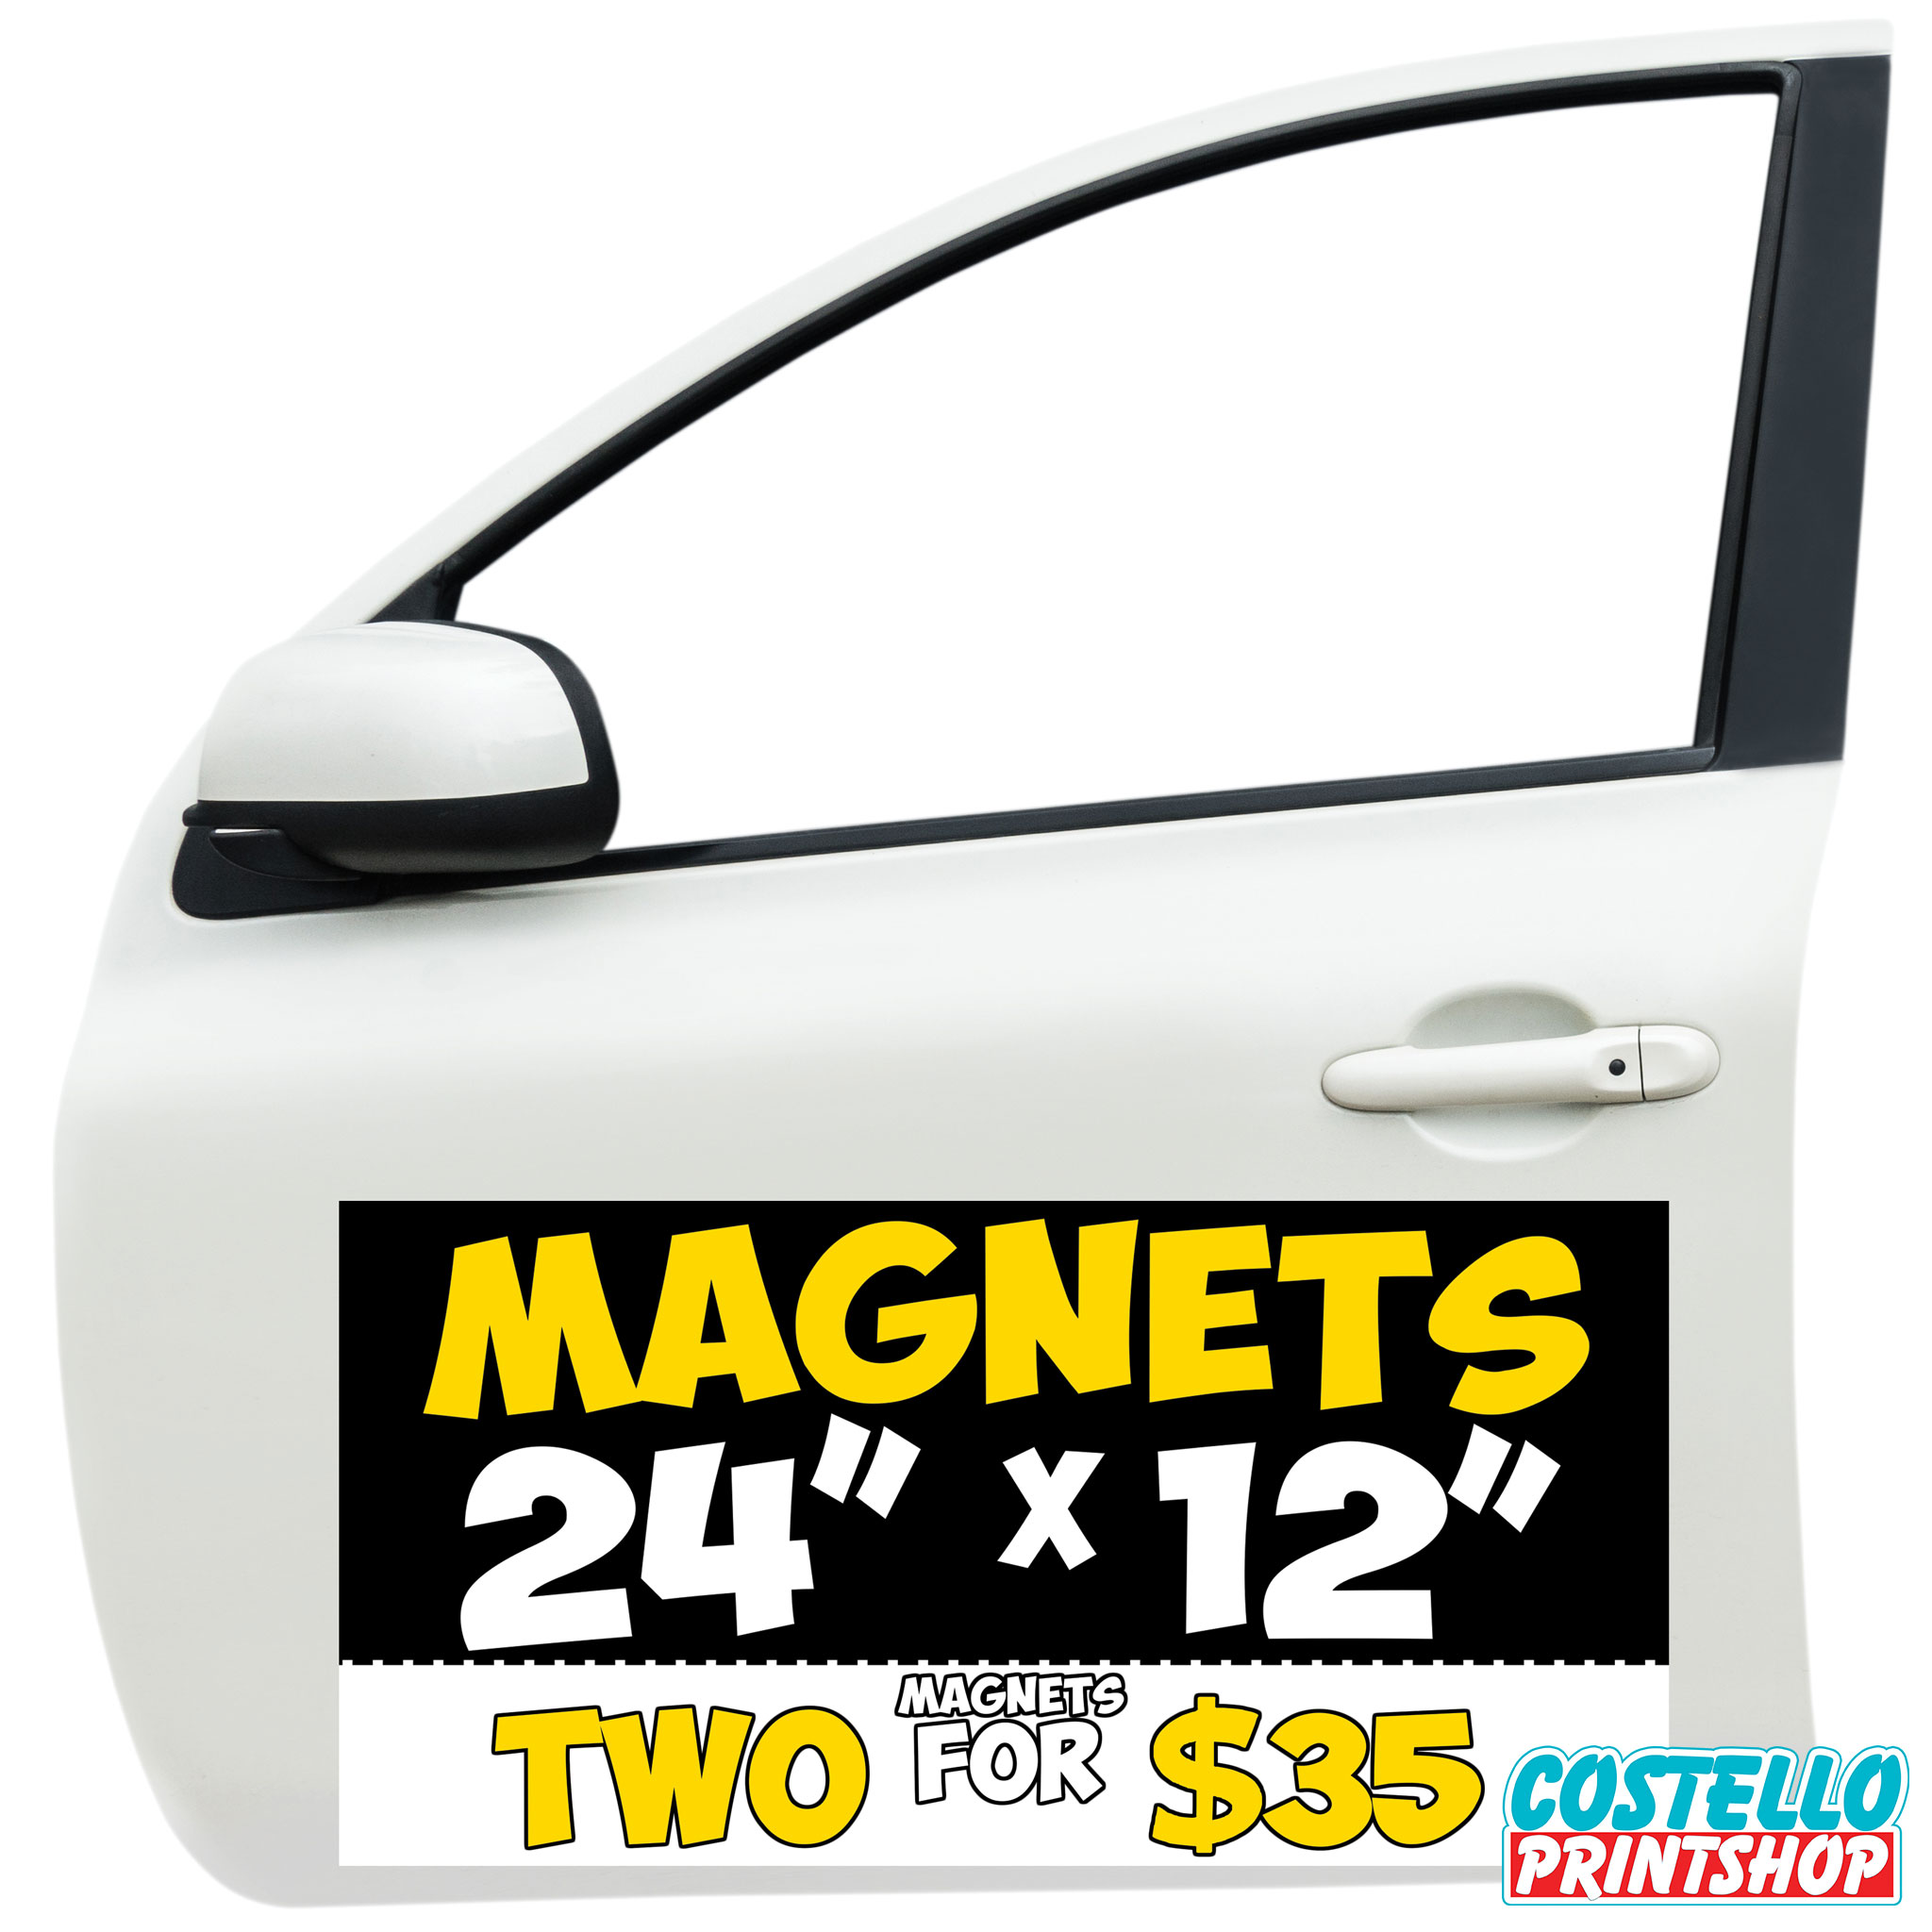 low-prices-on-car-magnets-in-Sacramento-12x12